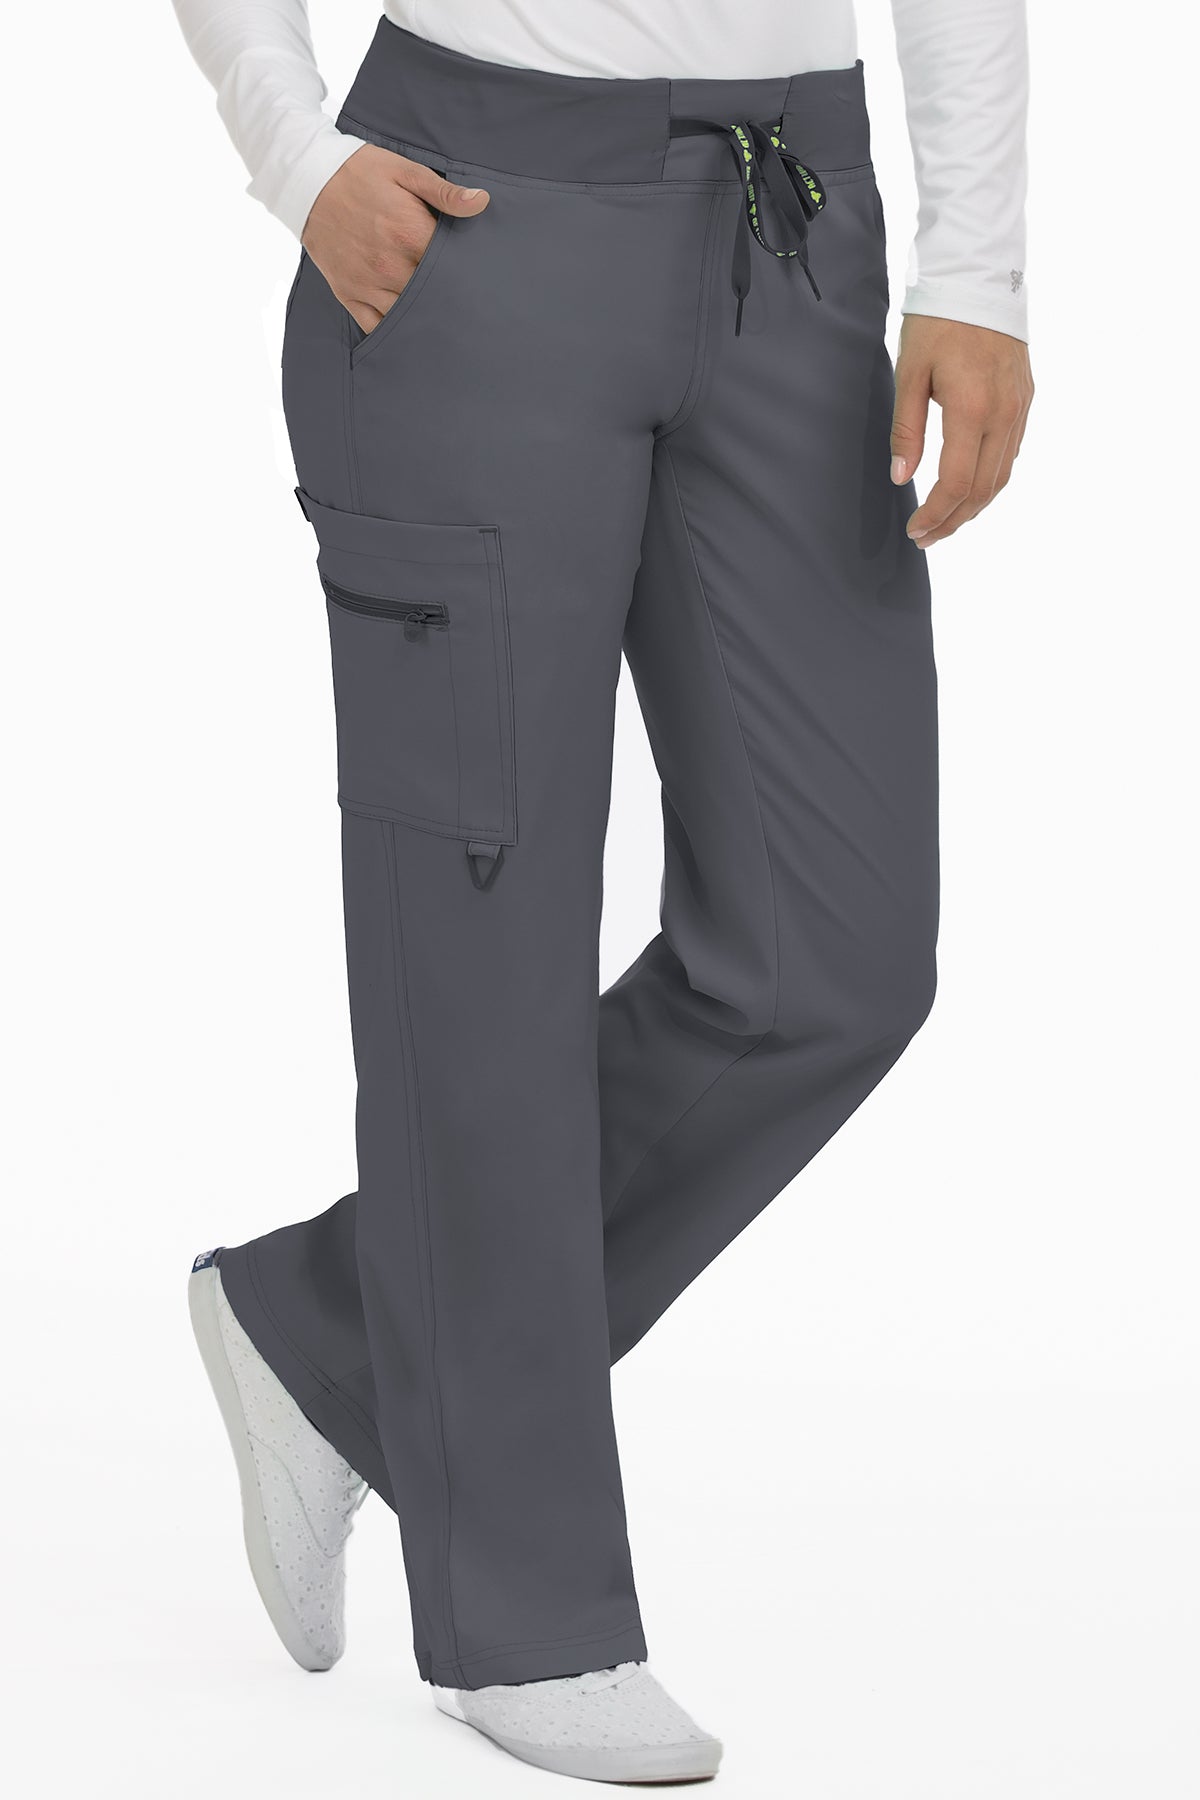 MED COUTURE Yoga 1 Cargo Pocket Pant #8747 - Butterfly Touch Scrubs